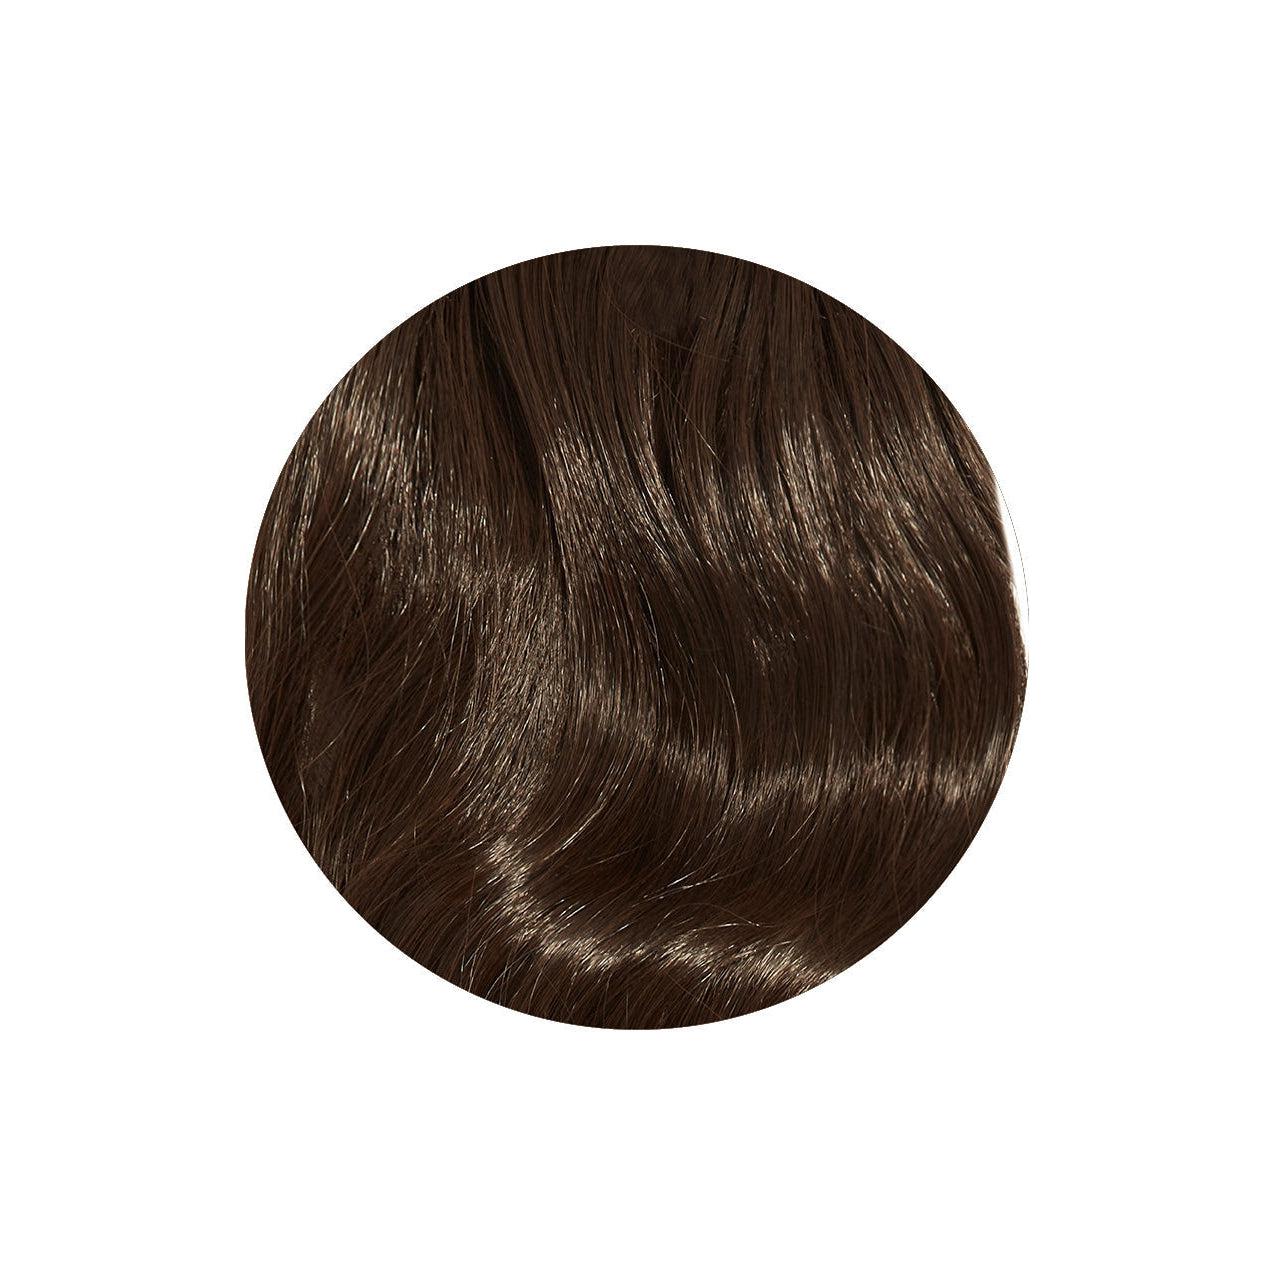 Glam Seamless Express Synthetic Wavy Ponytail 22"/55cm Dark Brown 2